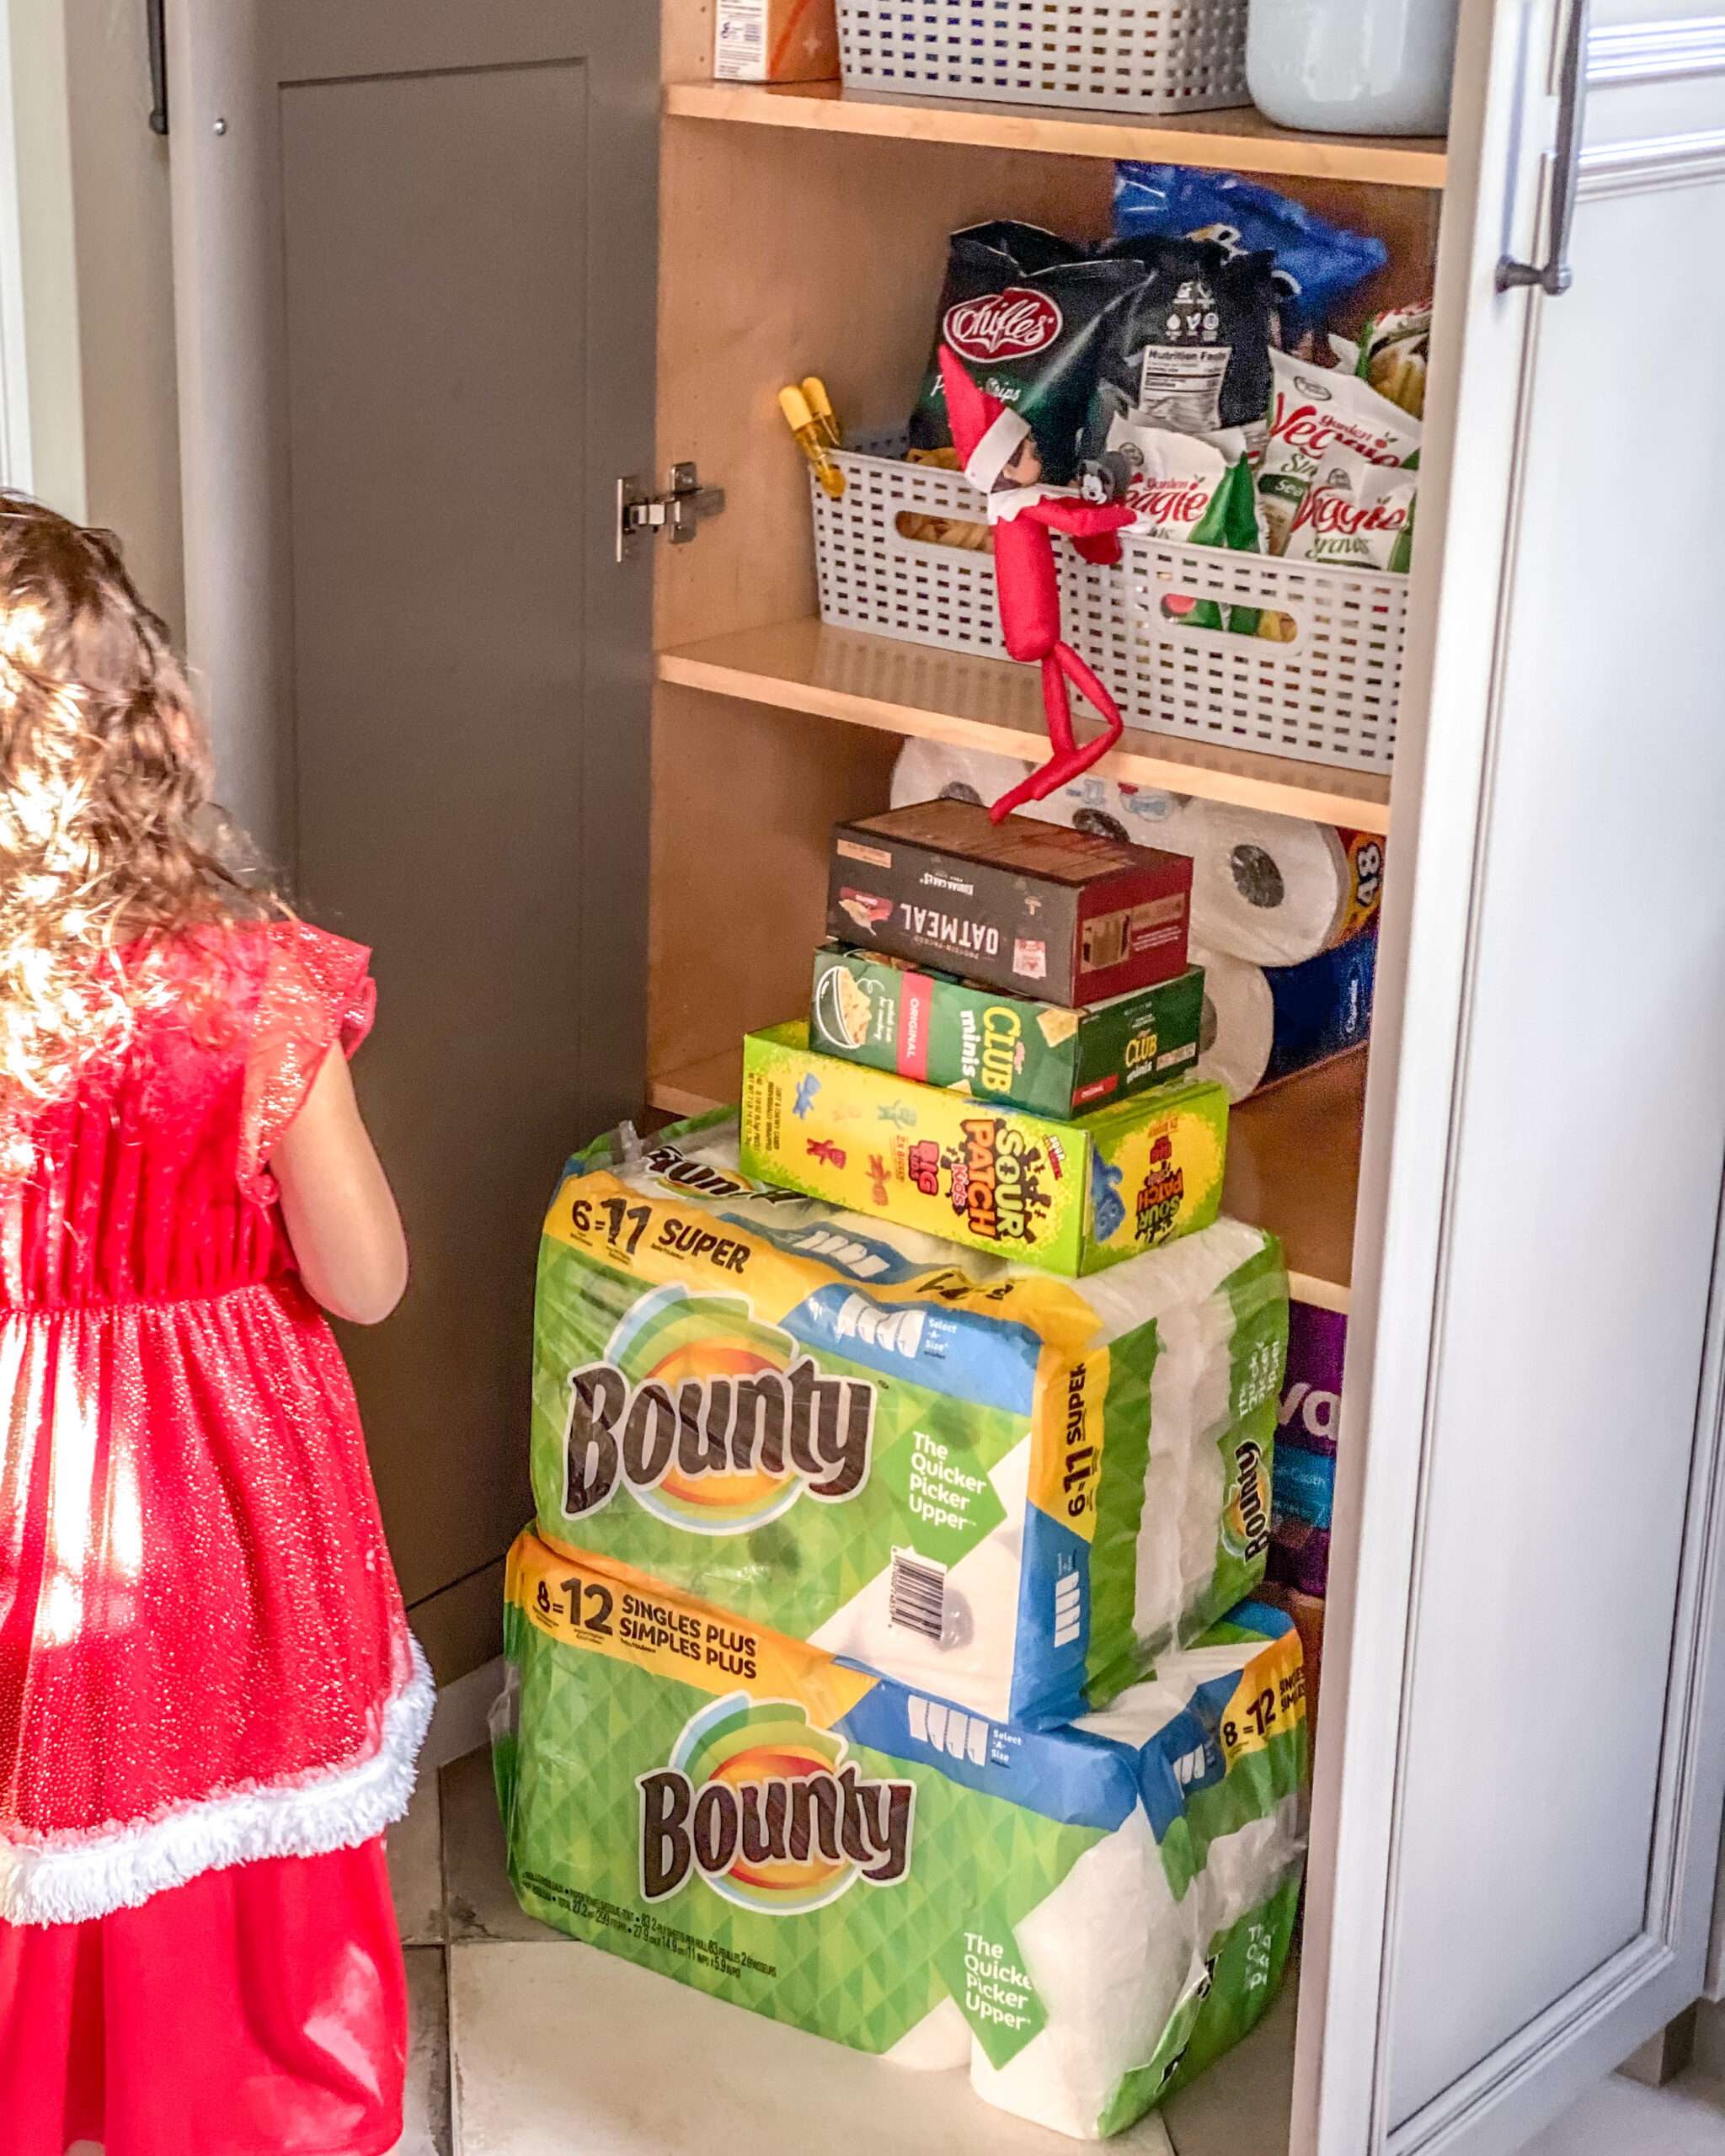 Our elf built a wall using household items from the pantry to get into the snacks. Fun & easy Elf on the Shelf ideas for your toddler or little kid. Quick to setup and lots of naughty and nice ideas, perfect to bring some Christmas magic to your home. #ElfOnTheShelf #ElfIdeas #ElfOnTheShelfIdeas #Christmas #ChristmasMagic